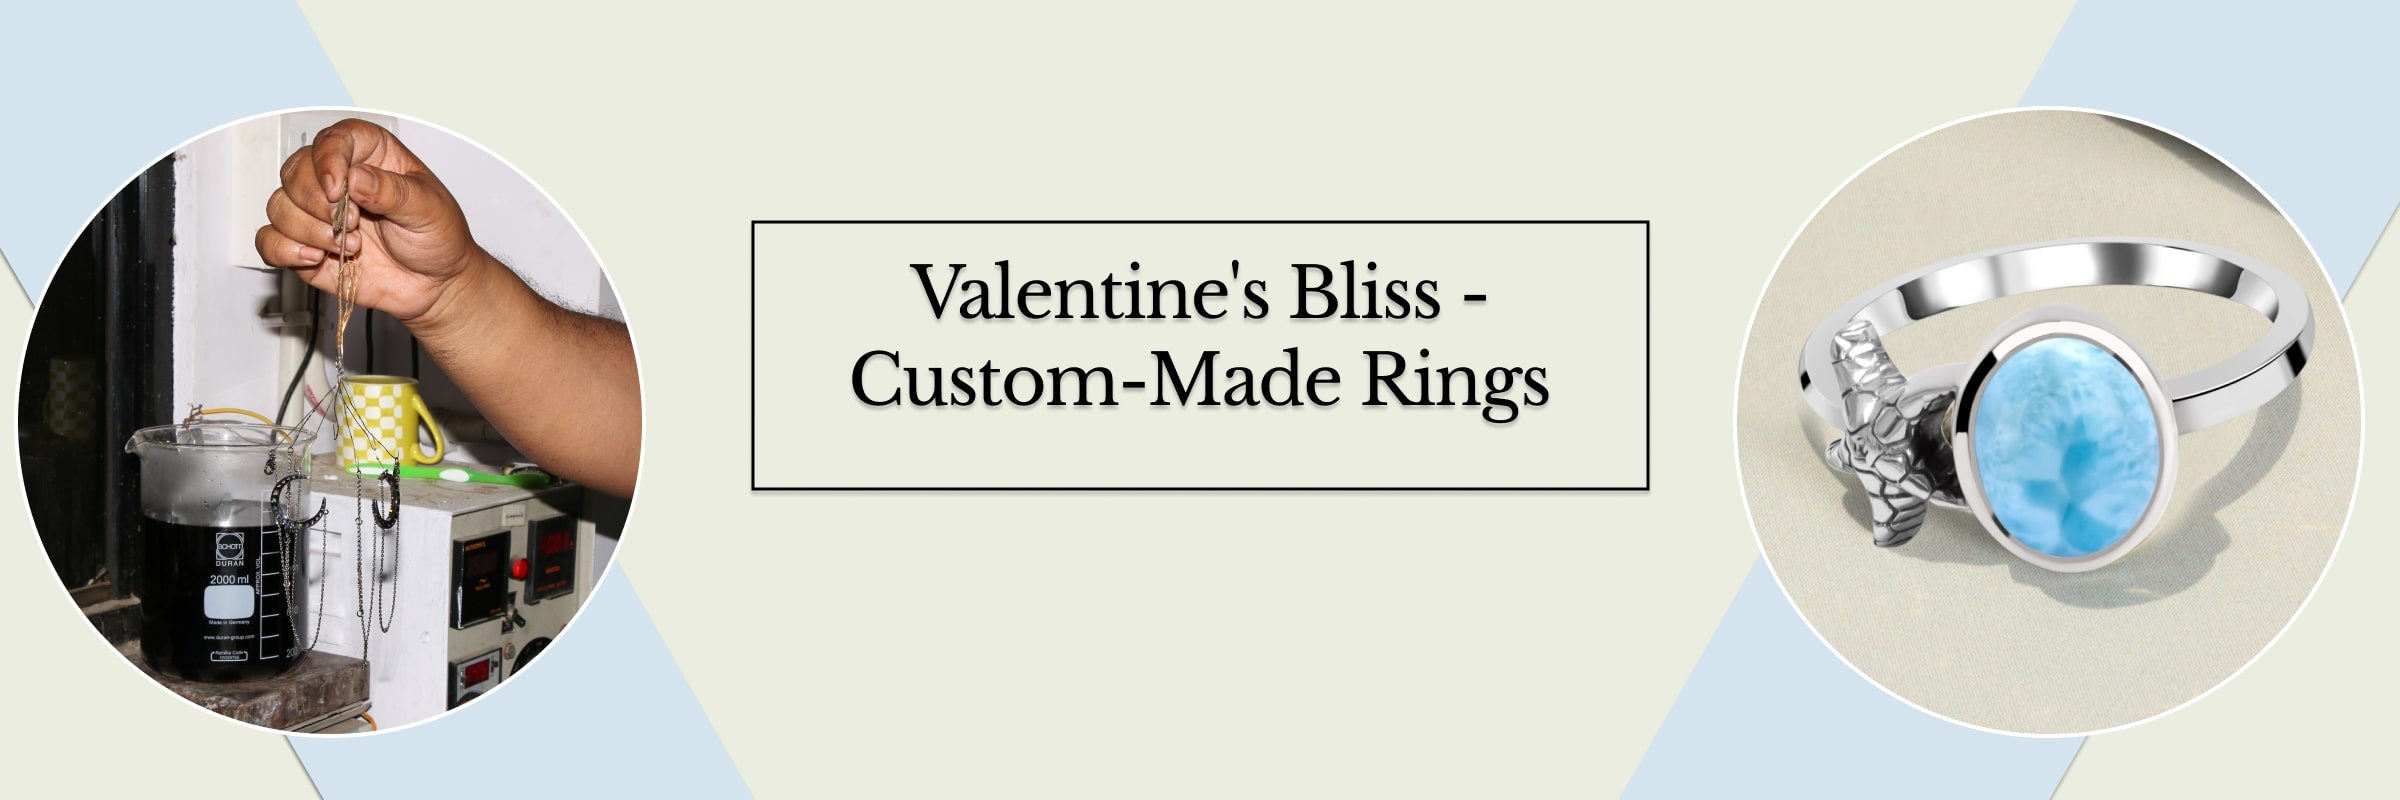 Make This Valentine's Special for Her with Custom Made Rings